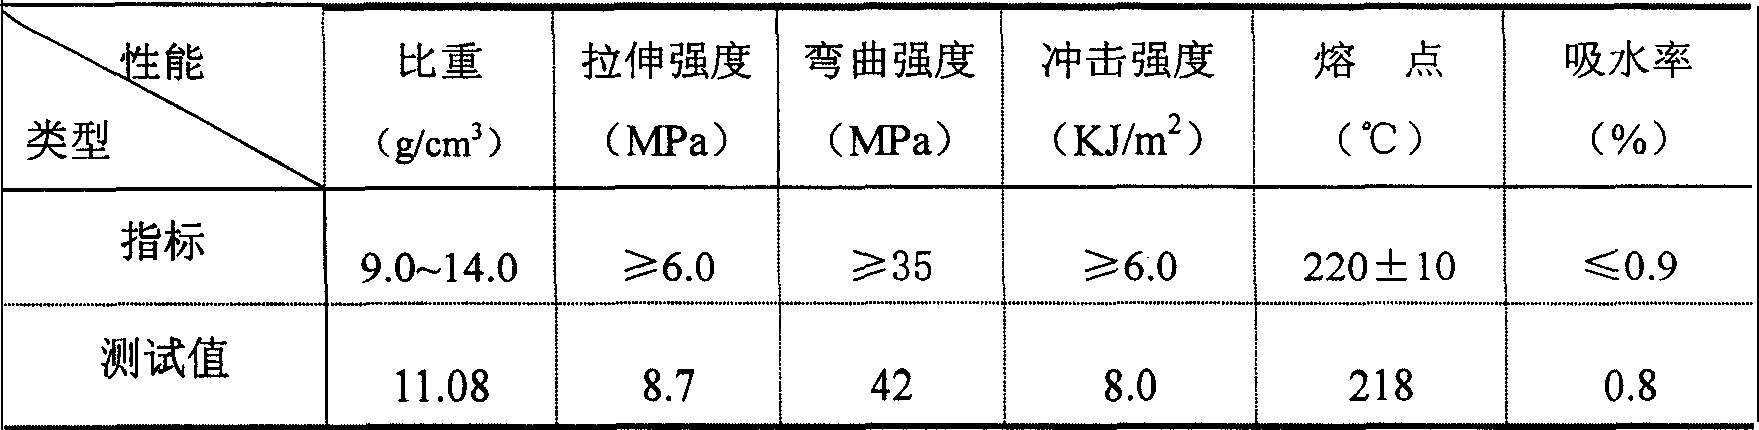 Production of high-specific weight resin